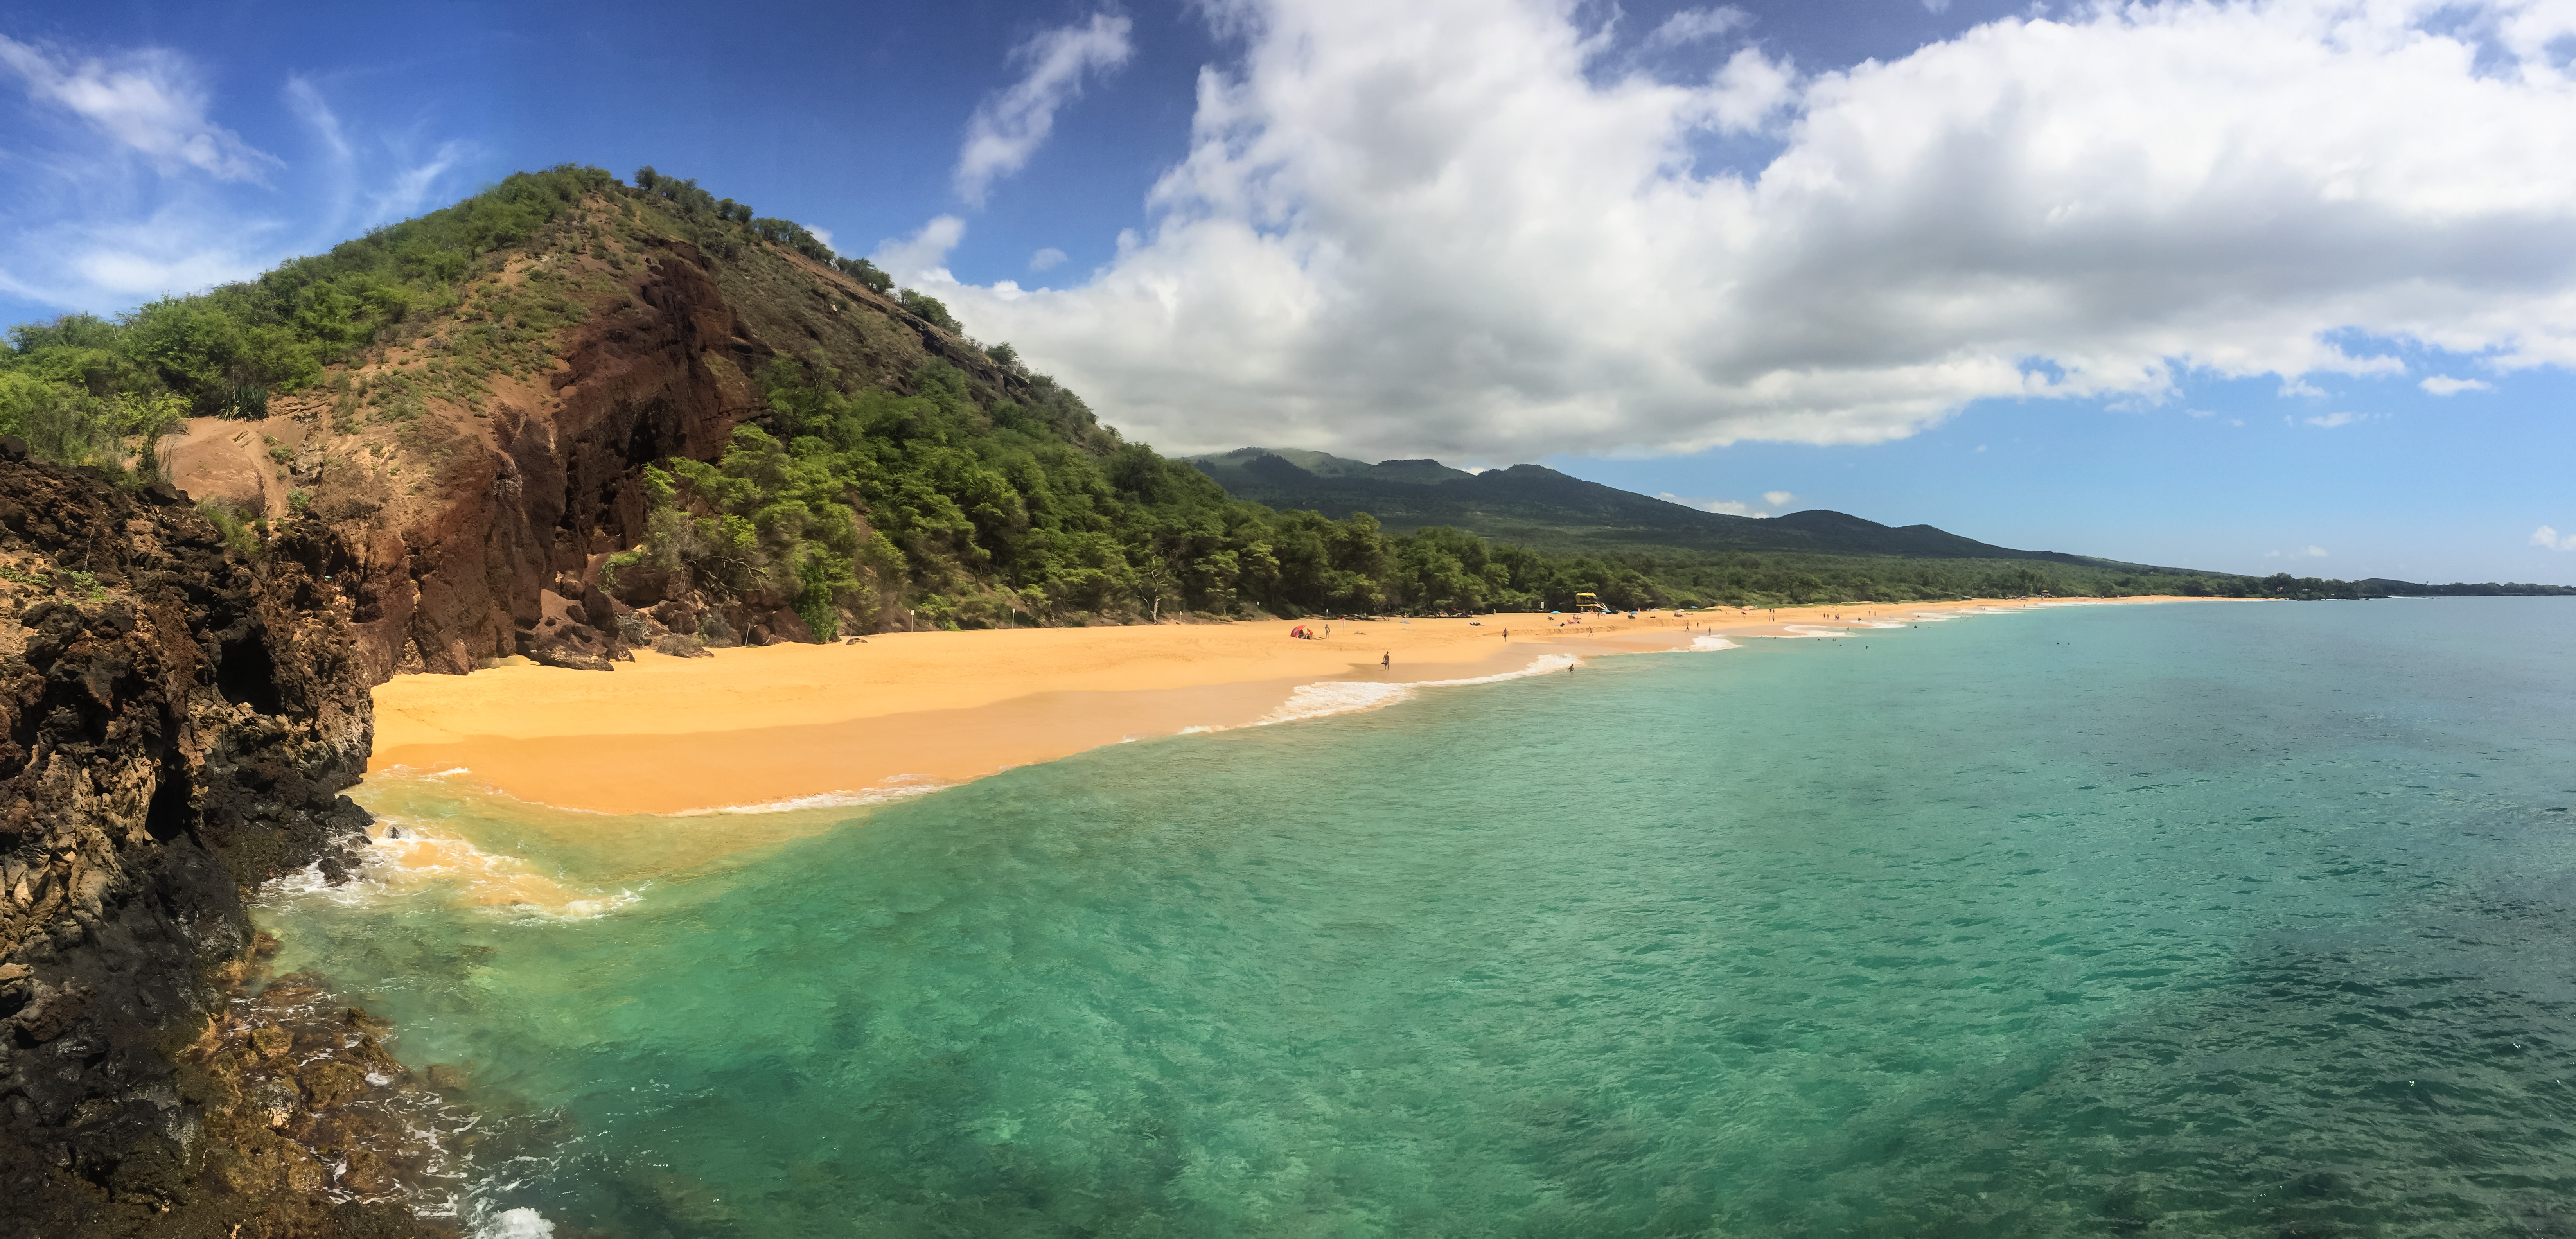 Maui's Makena Beach and Mountains viewed from offshore